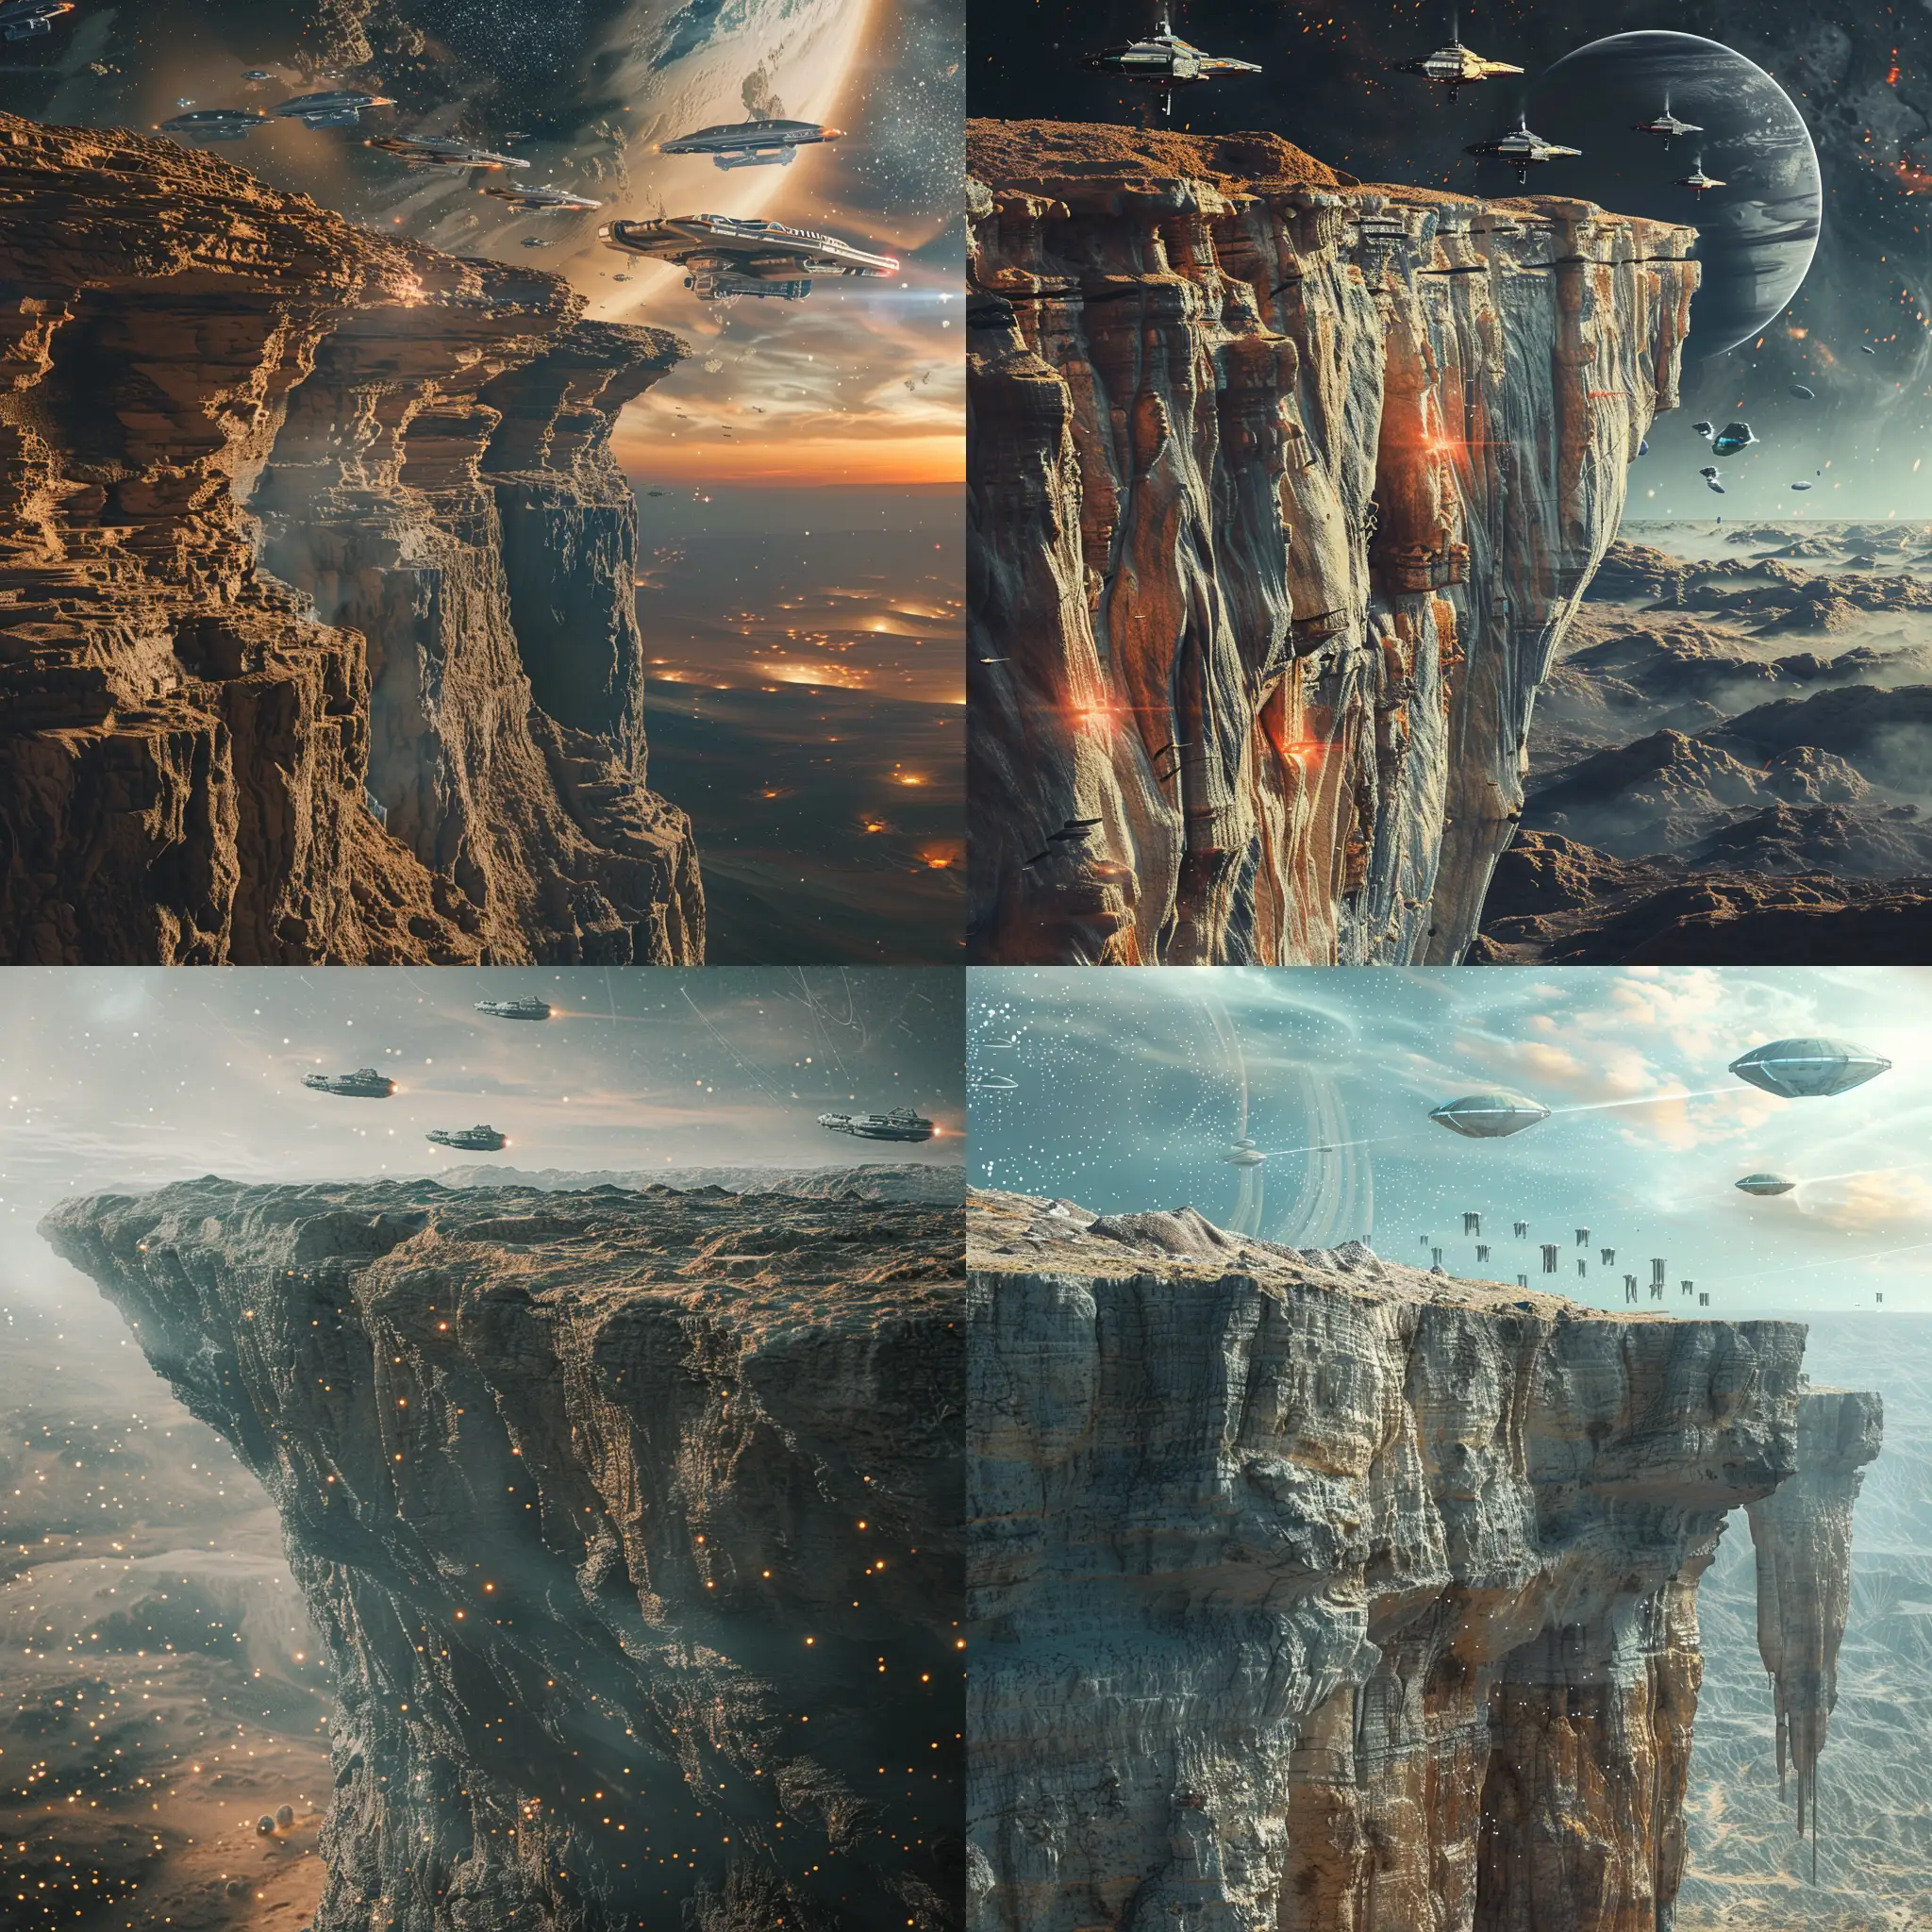 Cosmic-Landscape-with-Space-Ships-DuneInspired-Fantastic-Planet-in-UltraDetailed-8K-Film-Photography